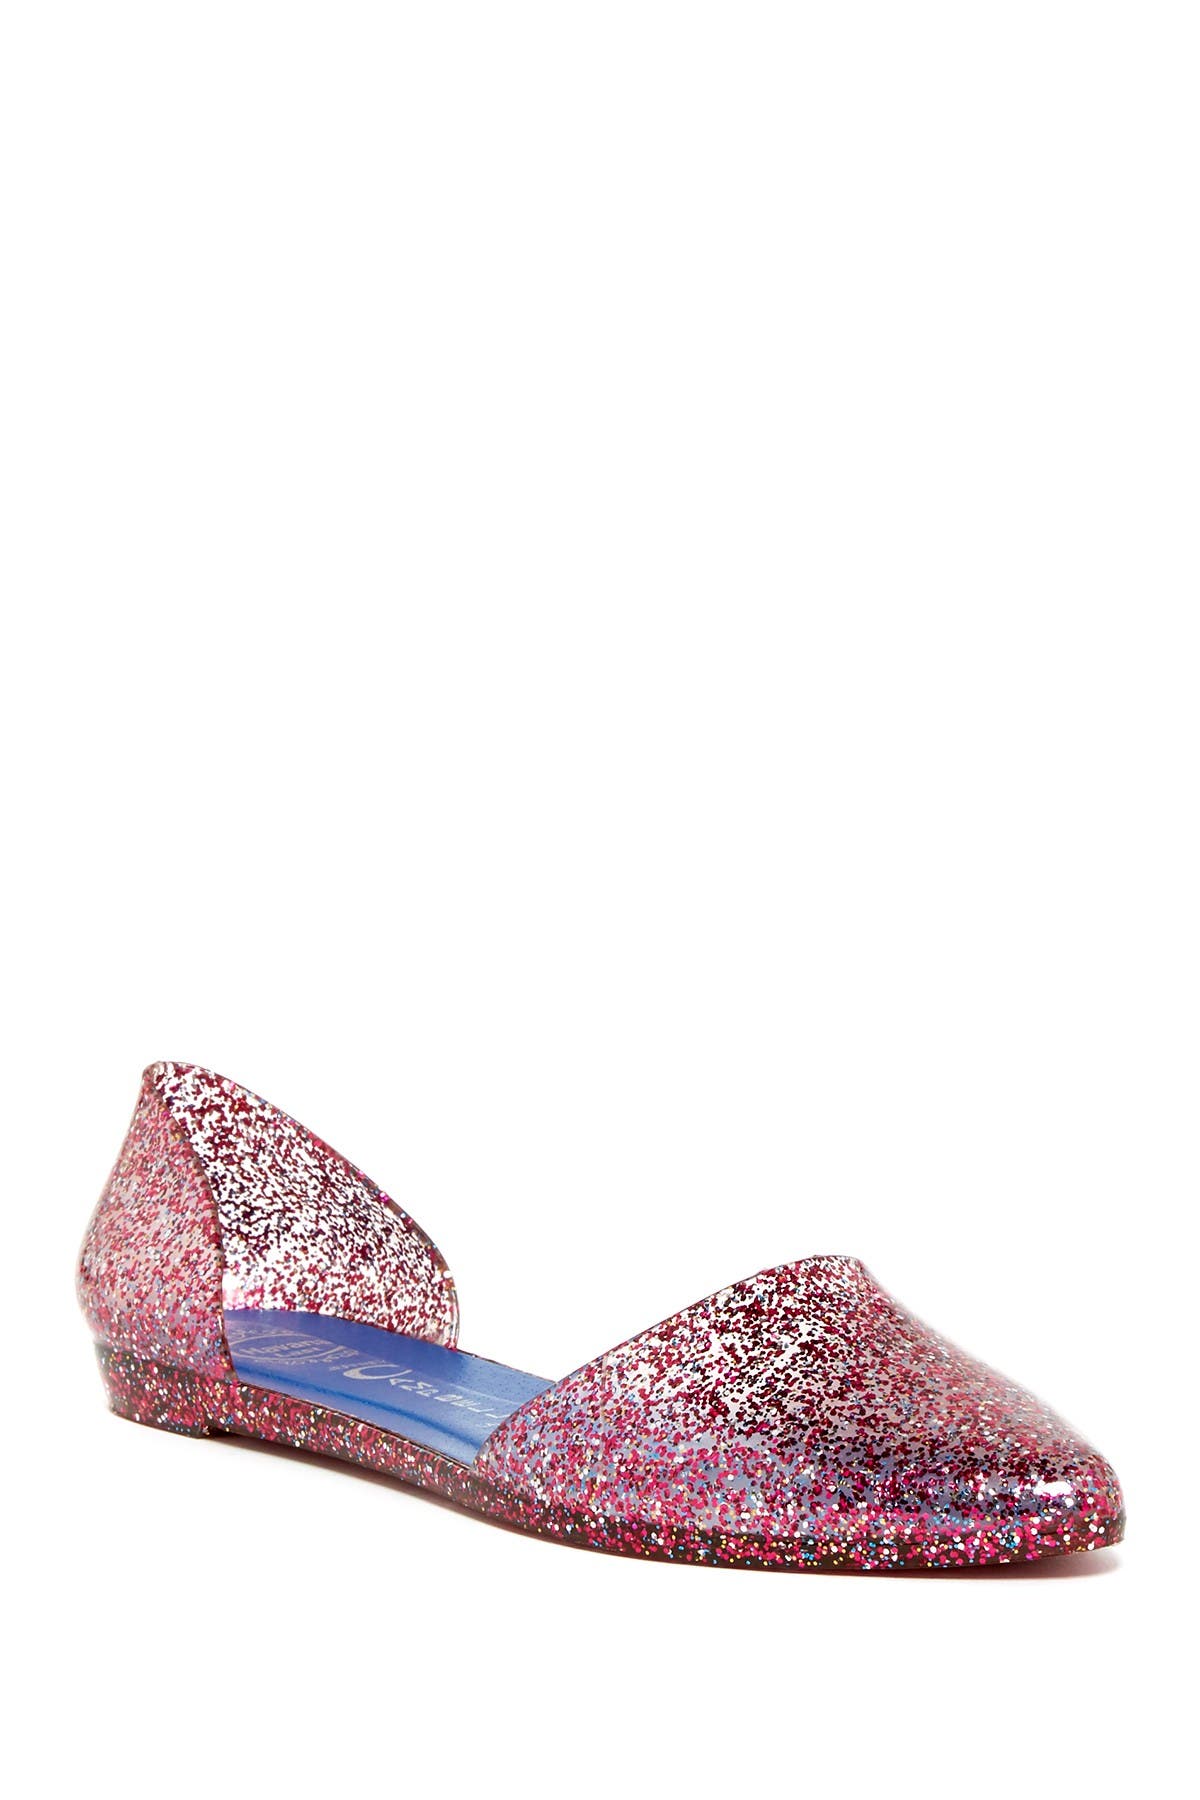 jeffrey campbell jelly shoes